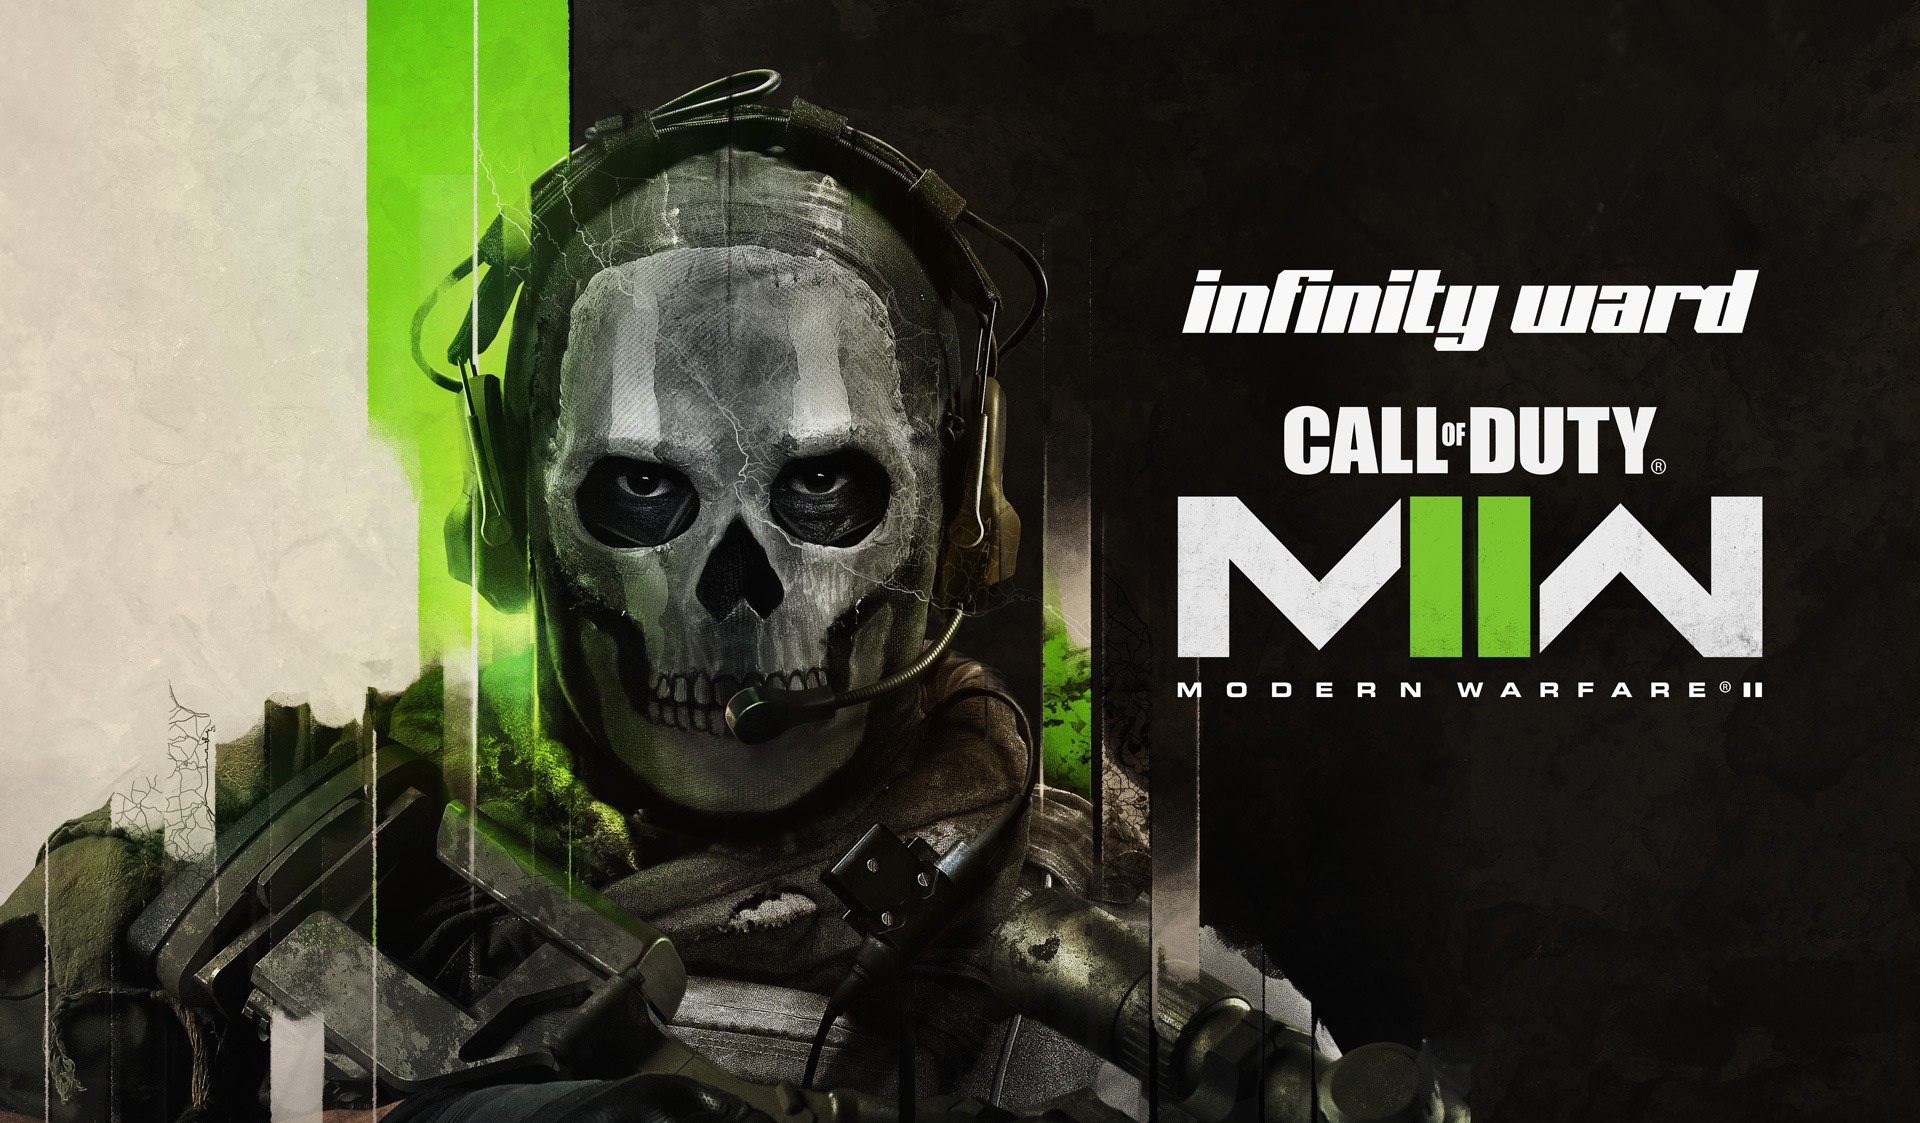 Preparing for the New Era of Call of Duty®, Presented by Infinity Ward 